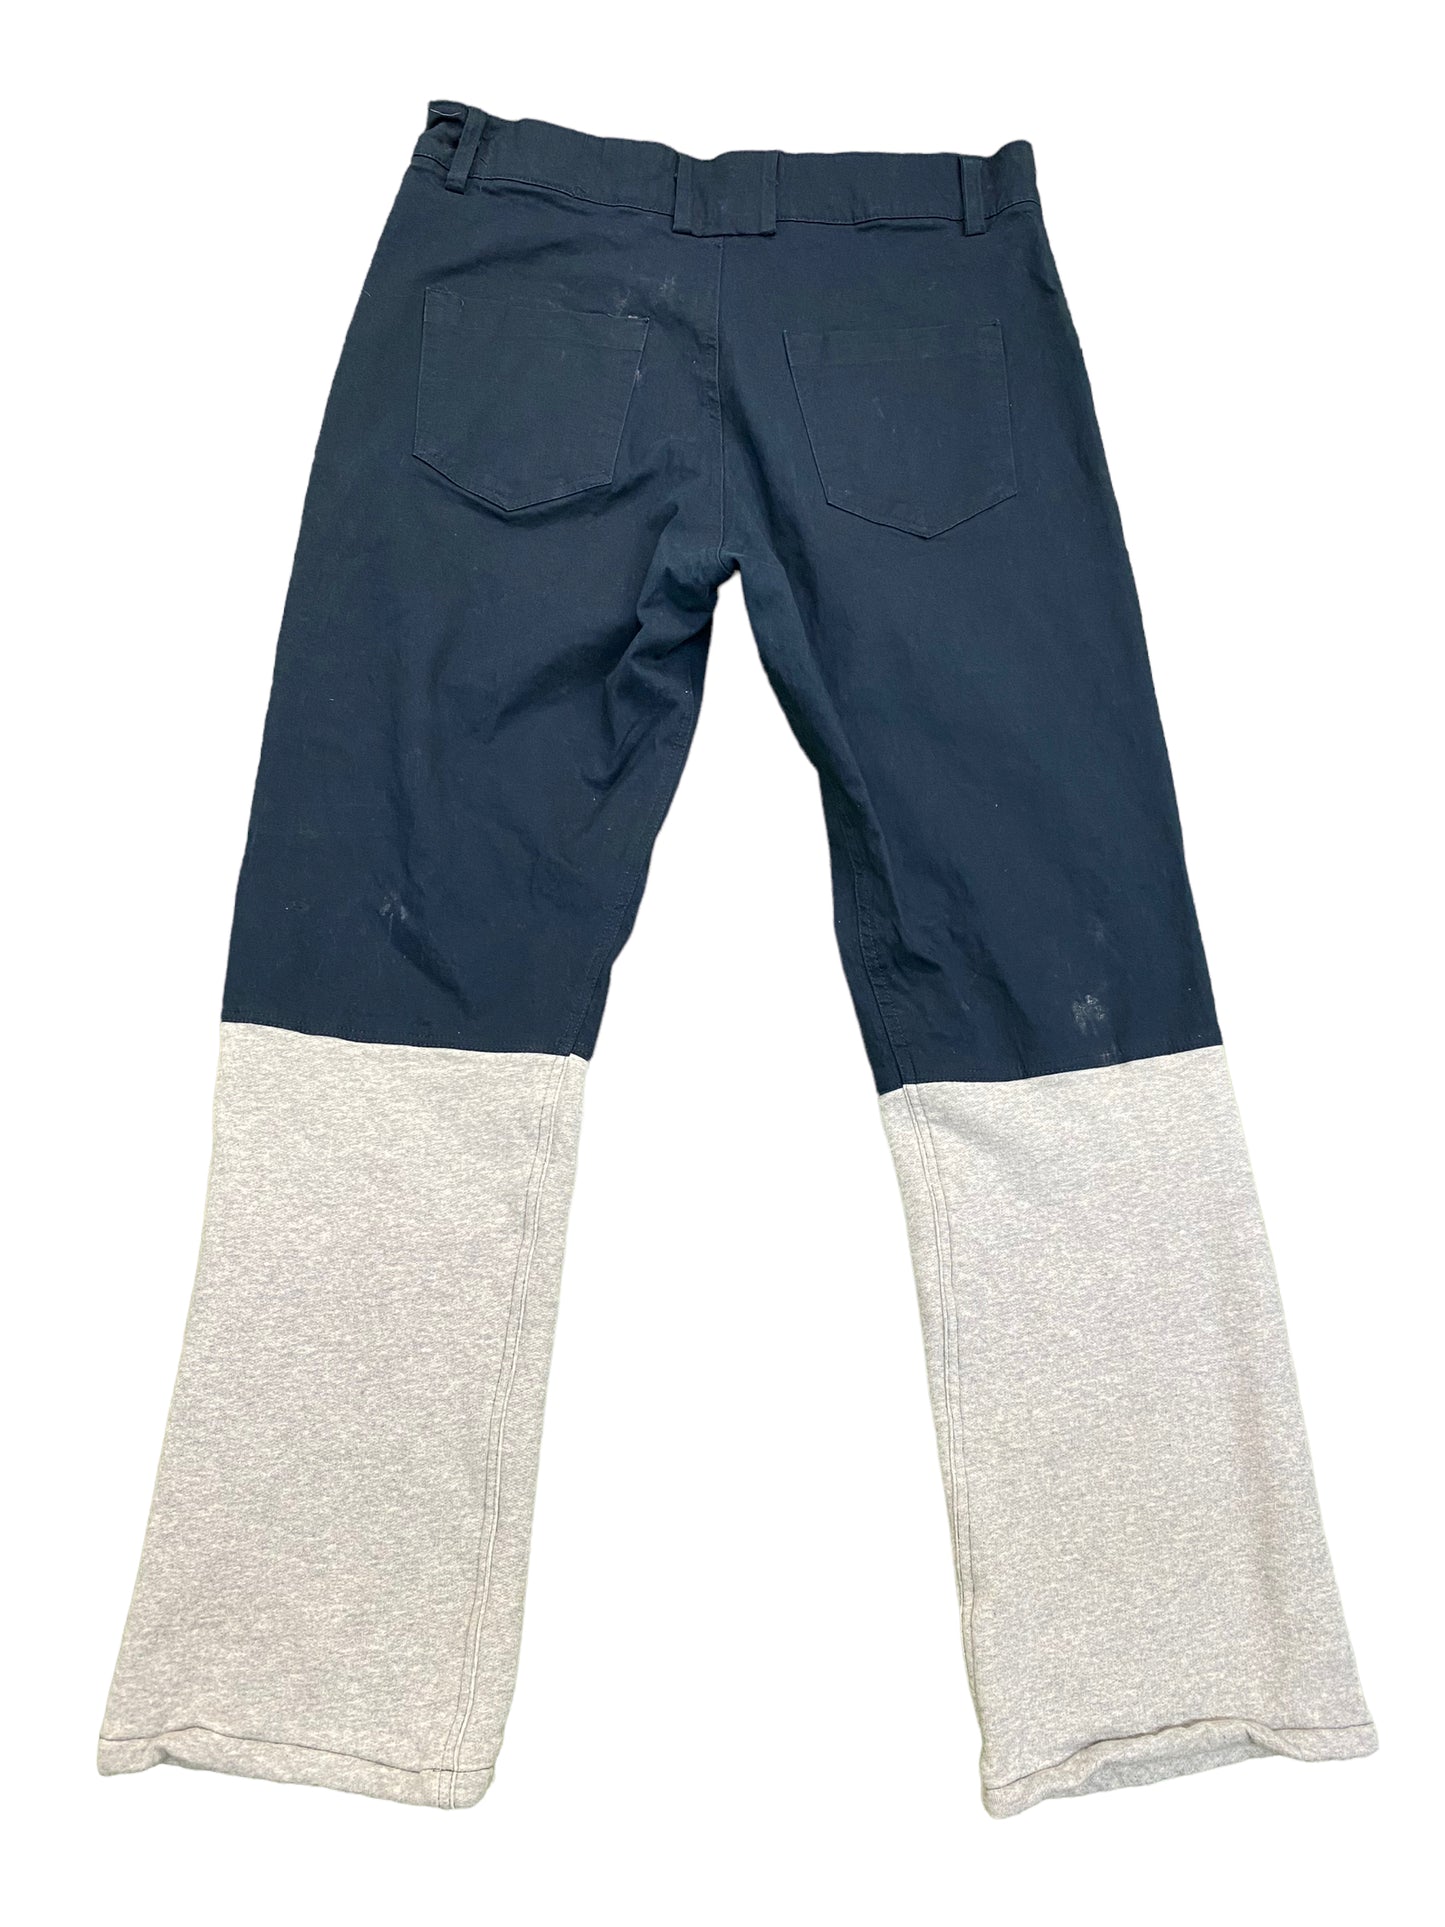 Preowned Youths in Balaclava Pants Sz 35x30